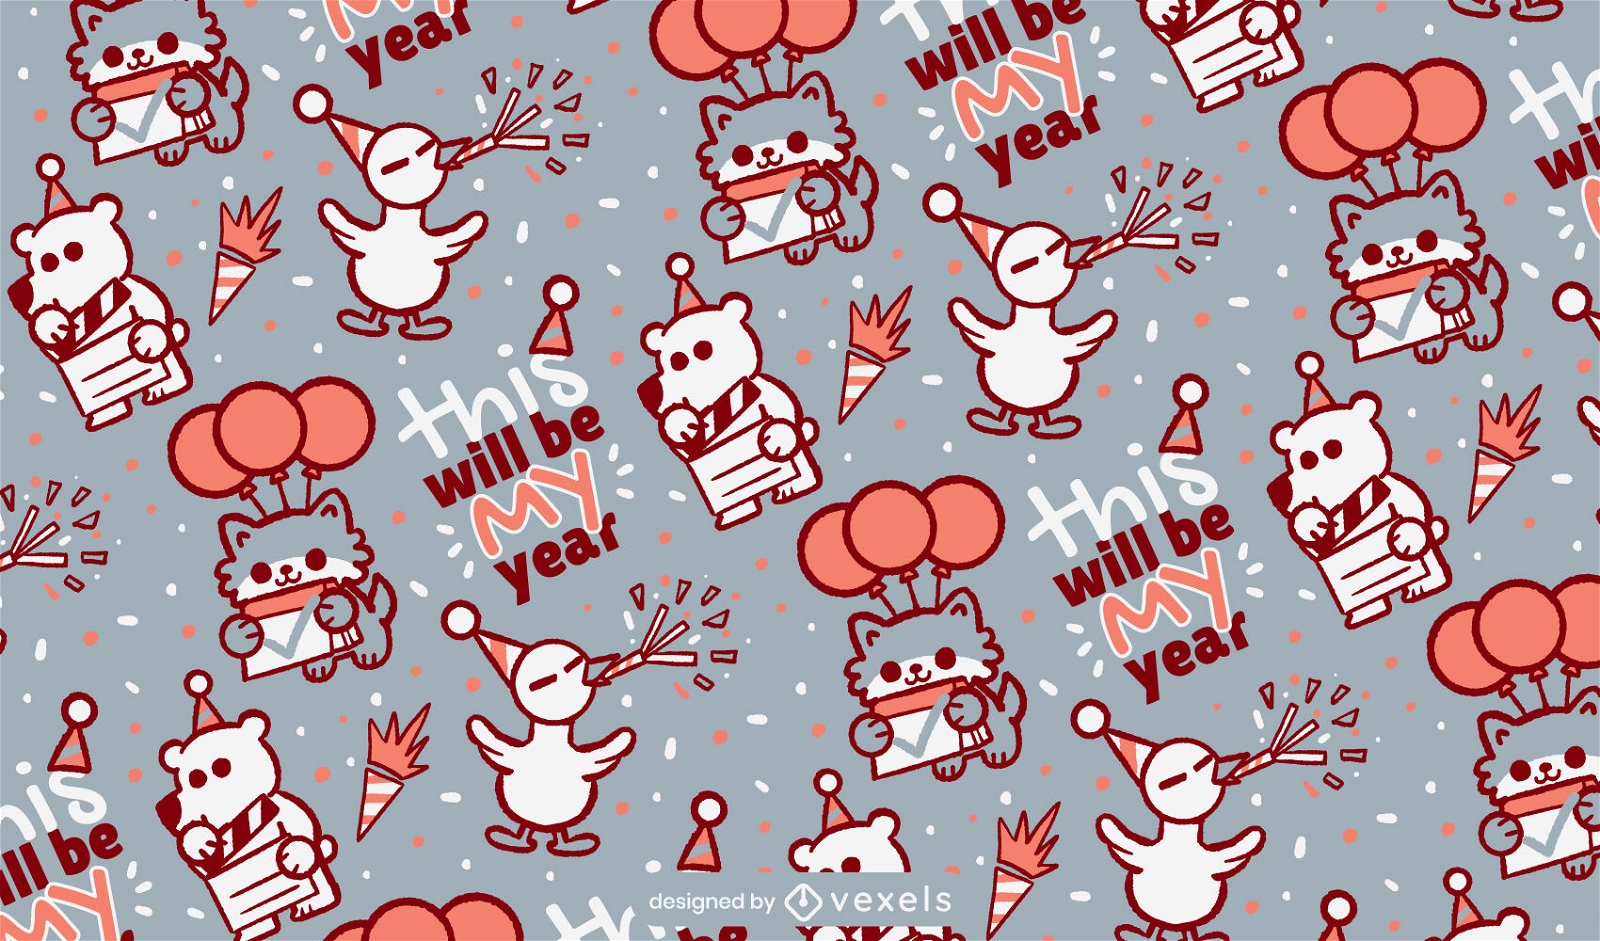 New Year party animals pattern design